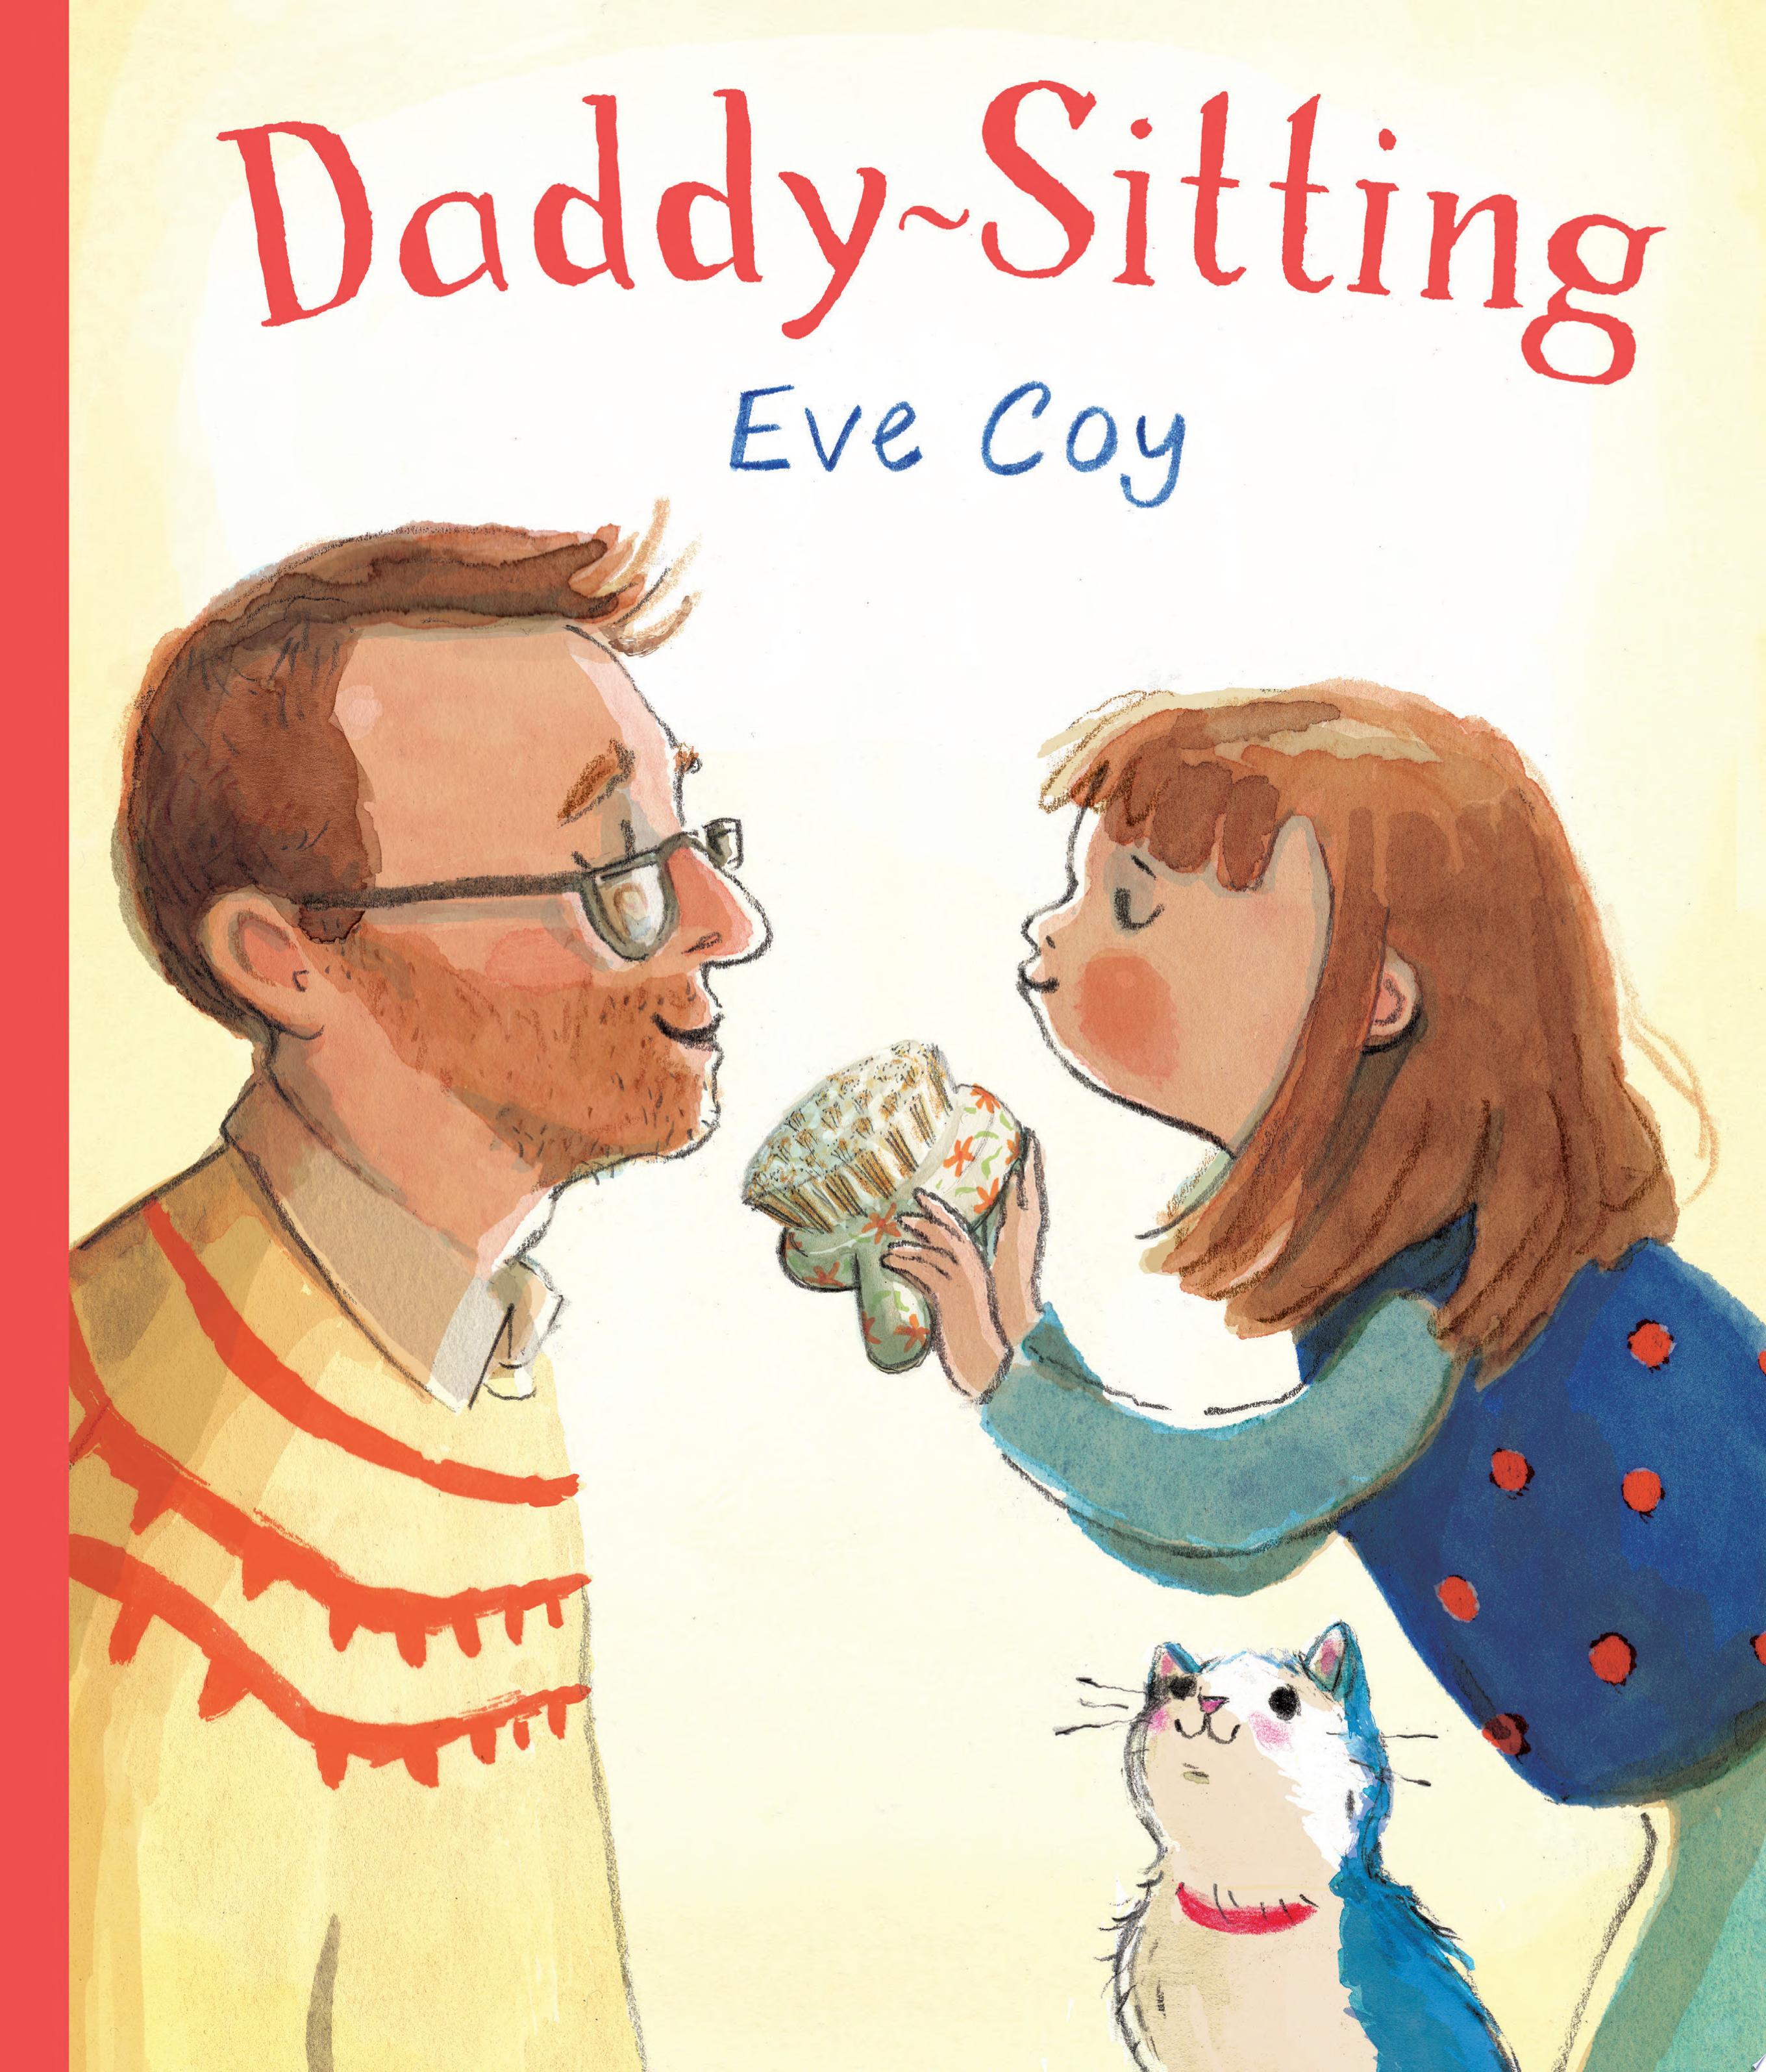 Image for "Daddy-Sitting"